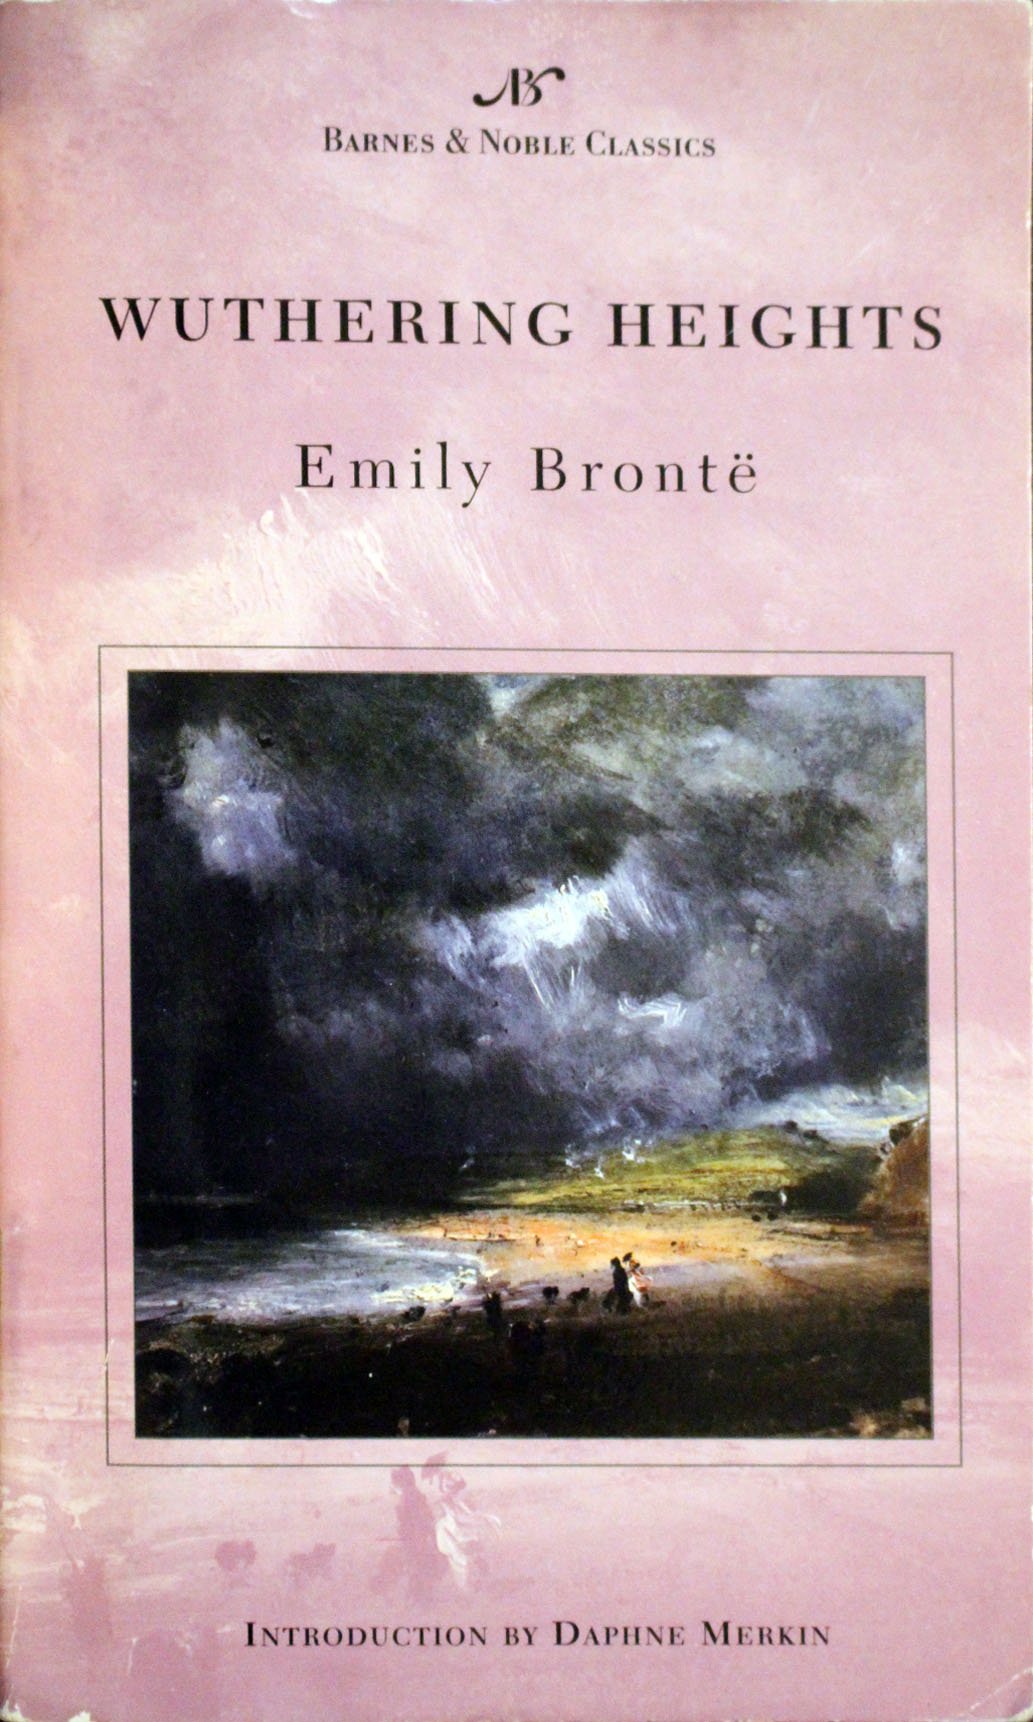 Wuthering Heights by Emily Bronte.jpg